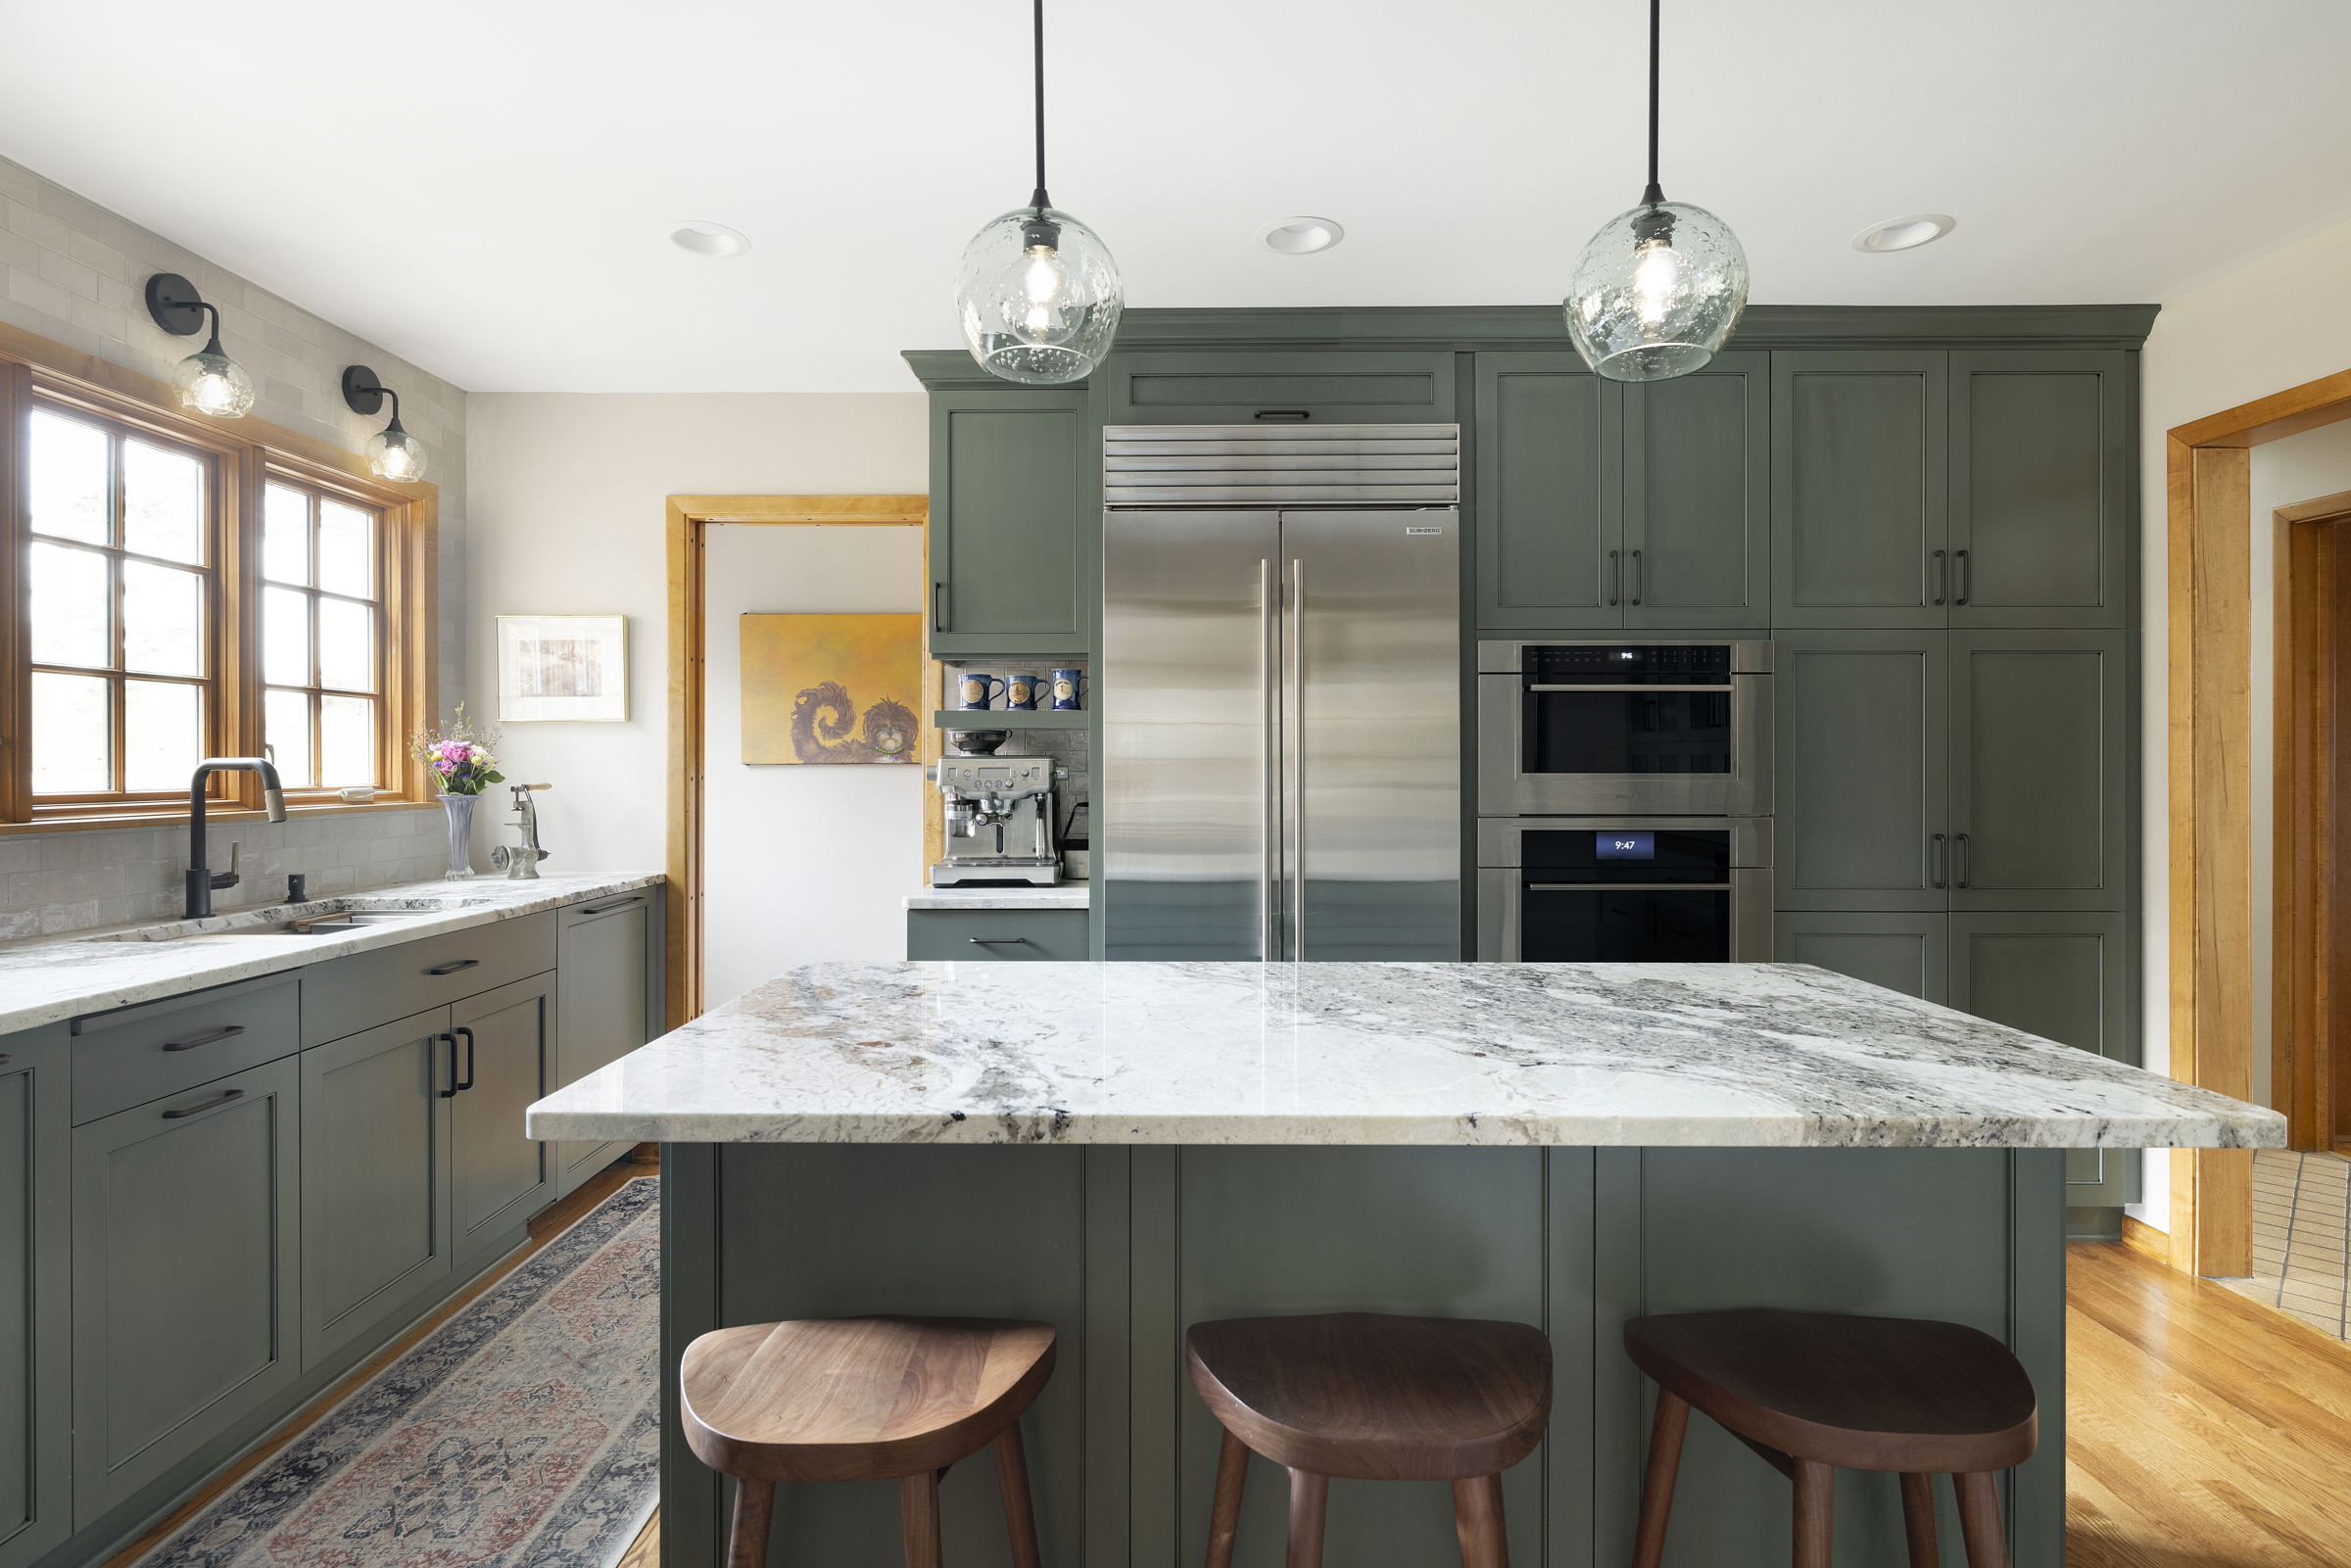 Kitchen remodel with green cabinets, wood accents, and beautiful marble countertops